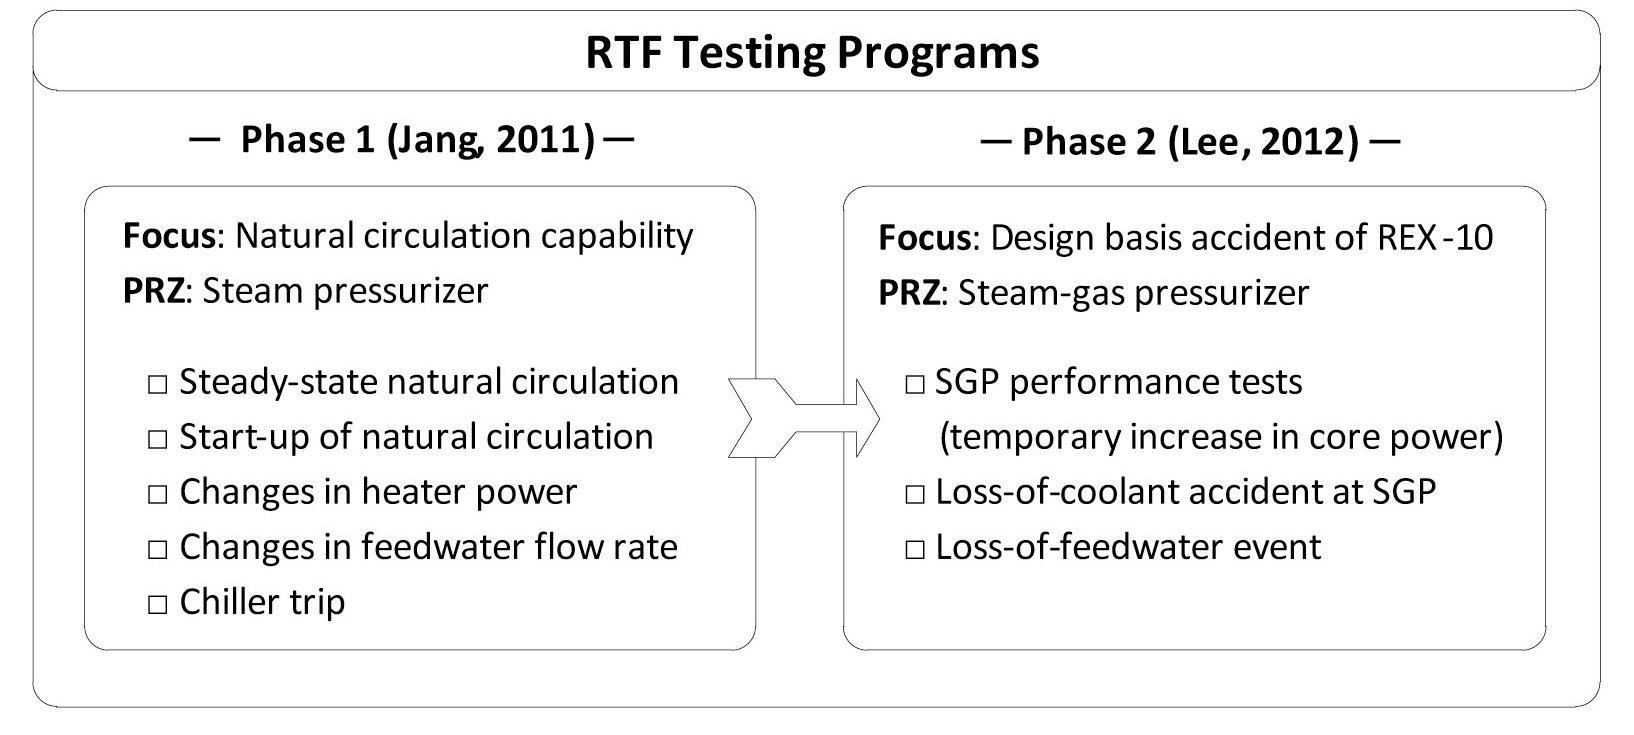 Integral Effect Tests Performed in RTF